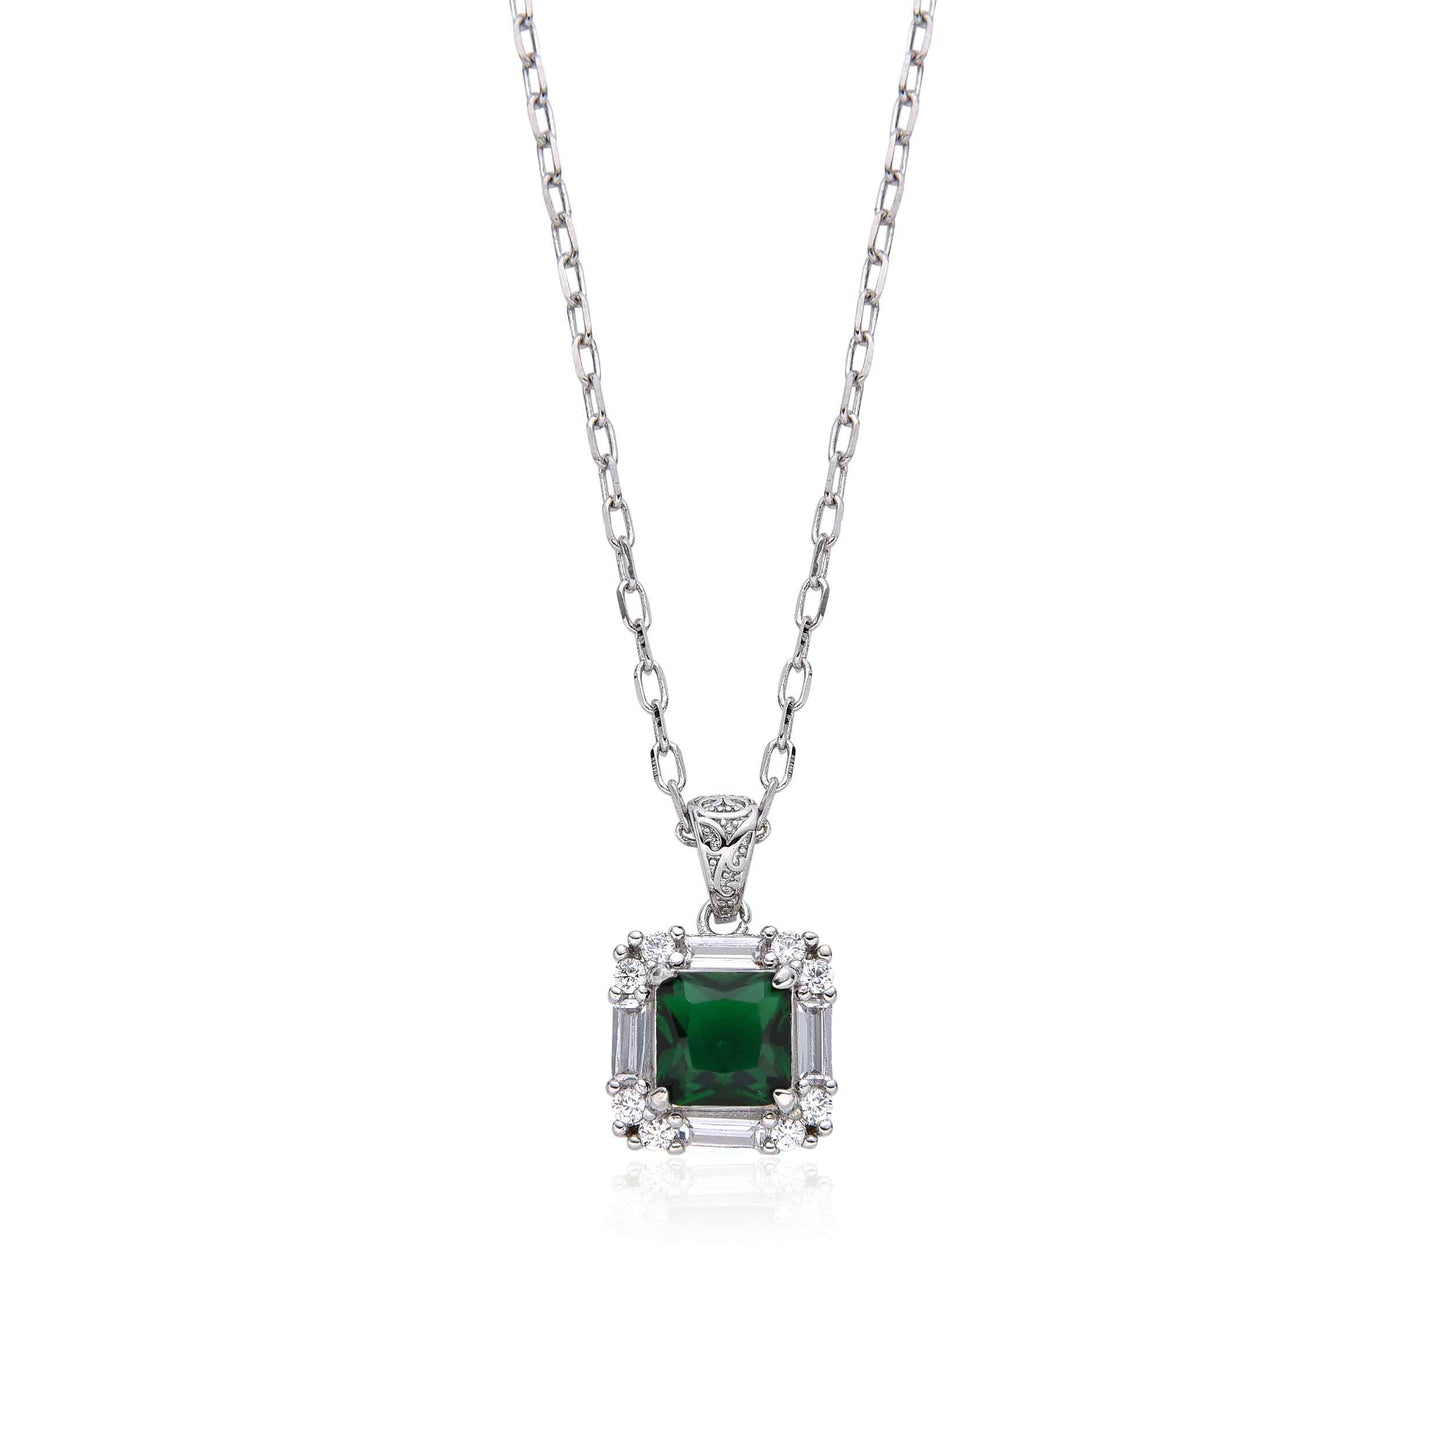 Rhodium Linked Necklace with Emerald Green Pendant